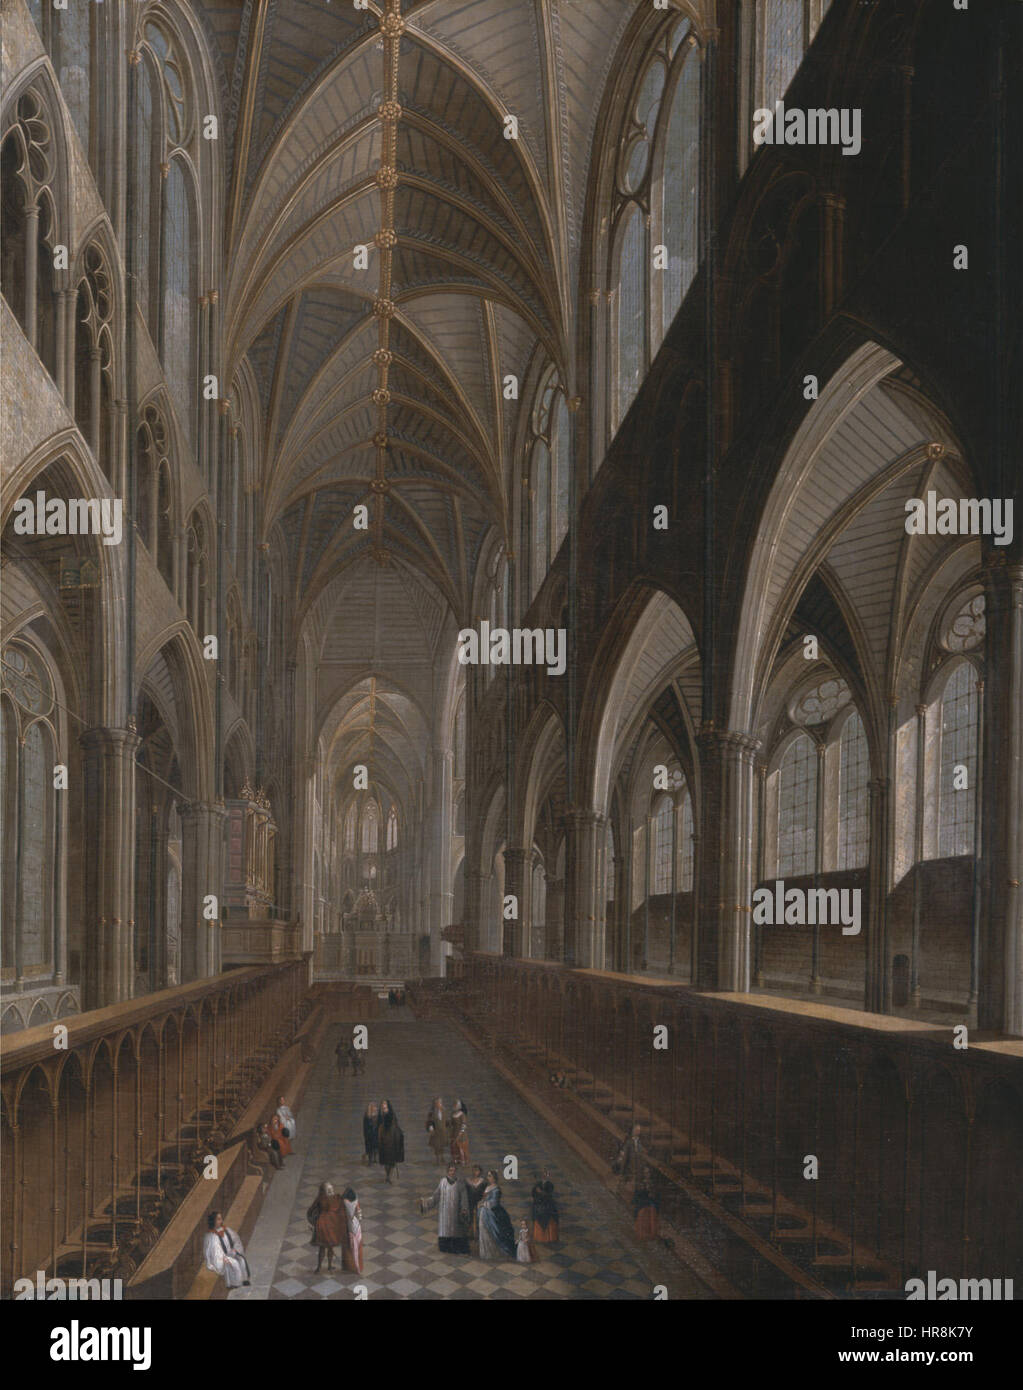 The Interior of Westminster Abbey - Google Art Project Stock Photo